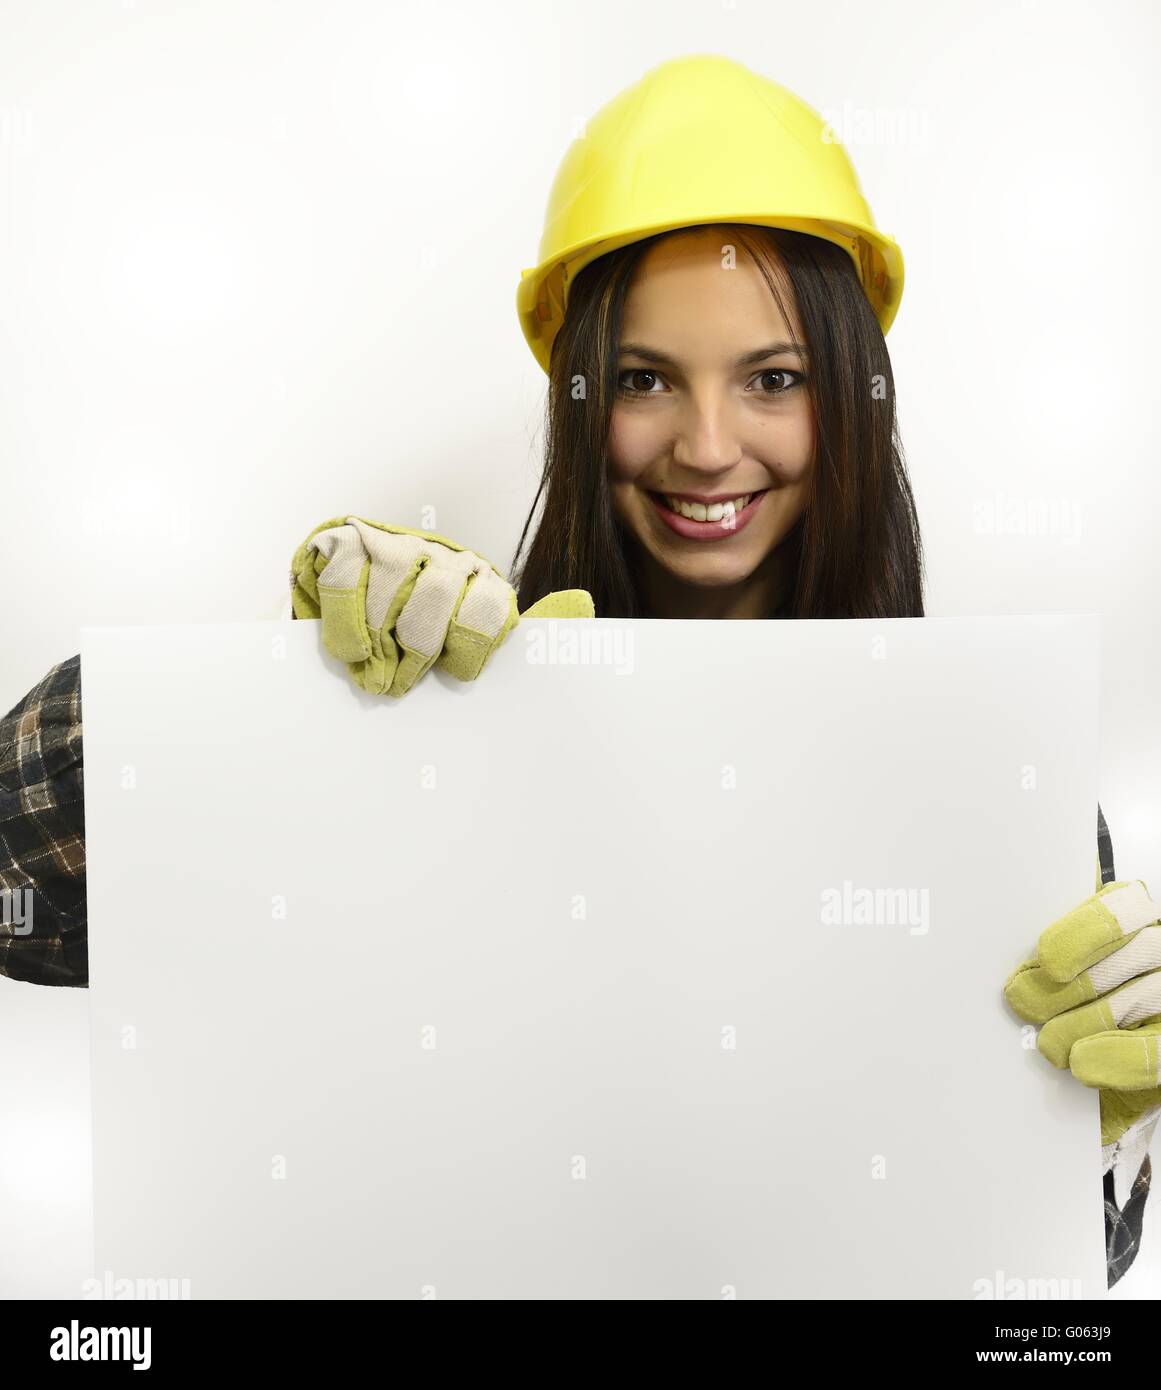 brunette young woman with work clothes and hard ha Stock Photo